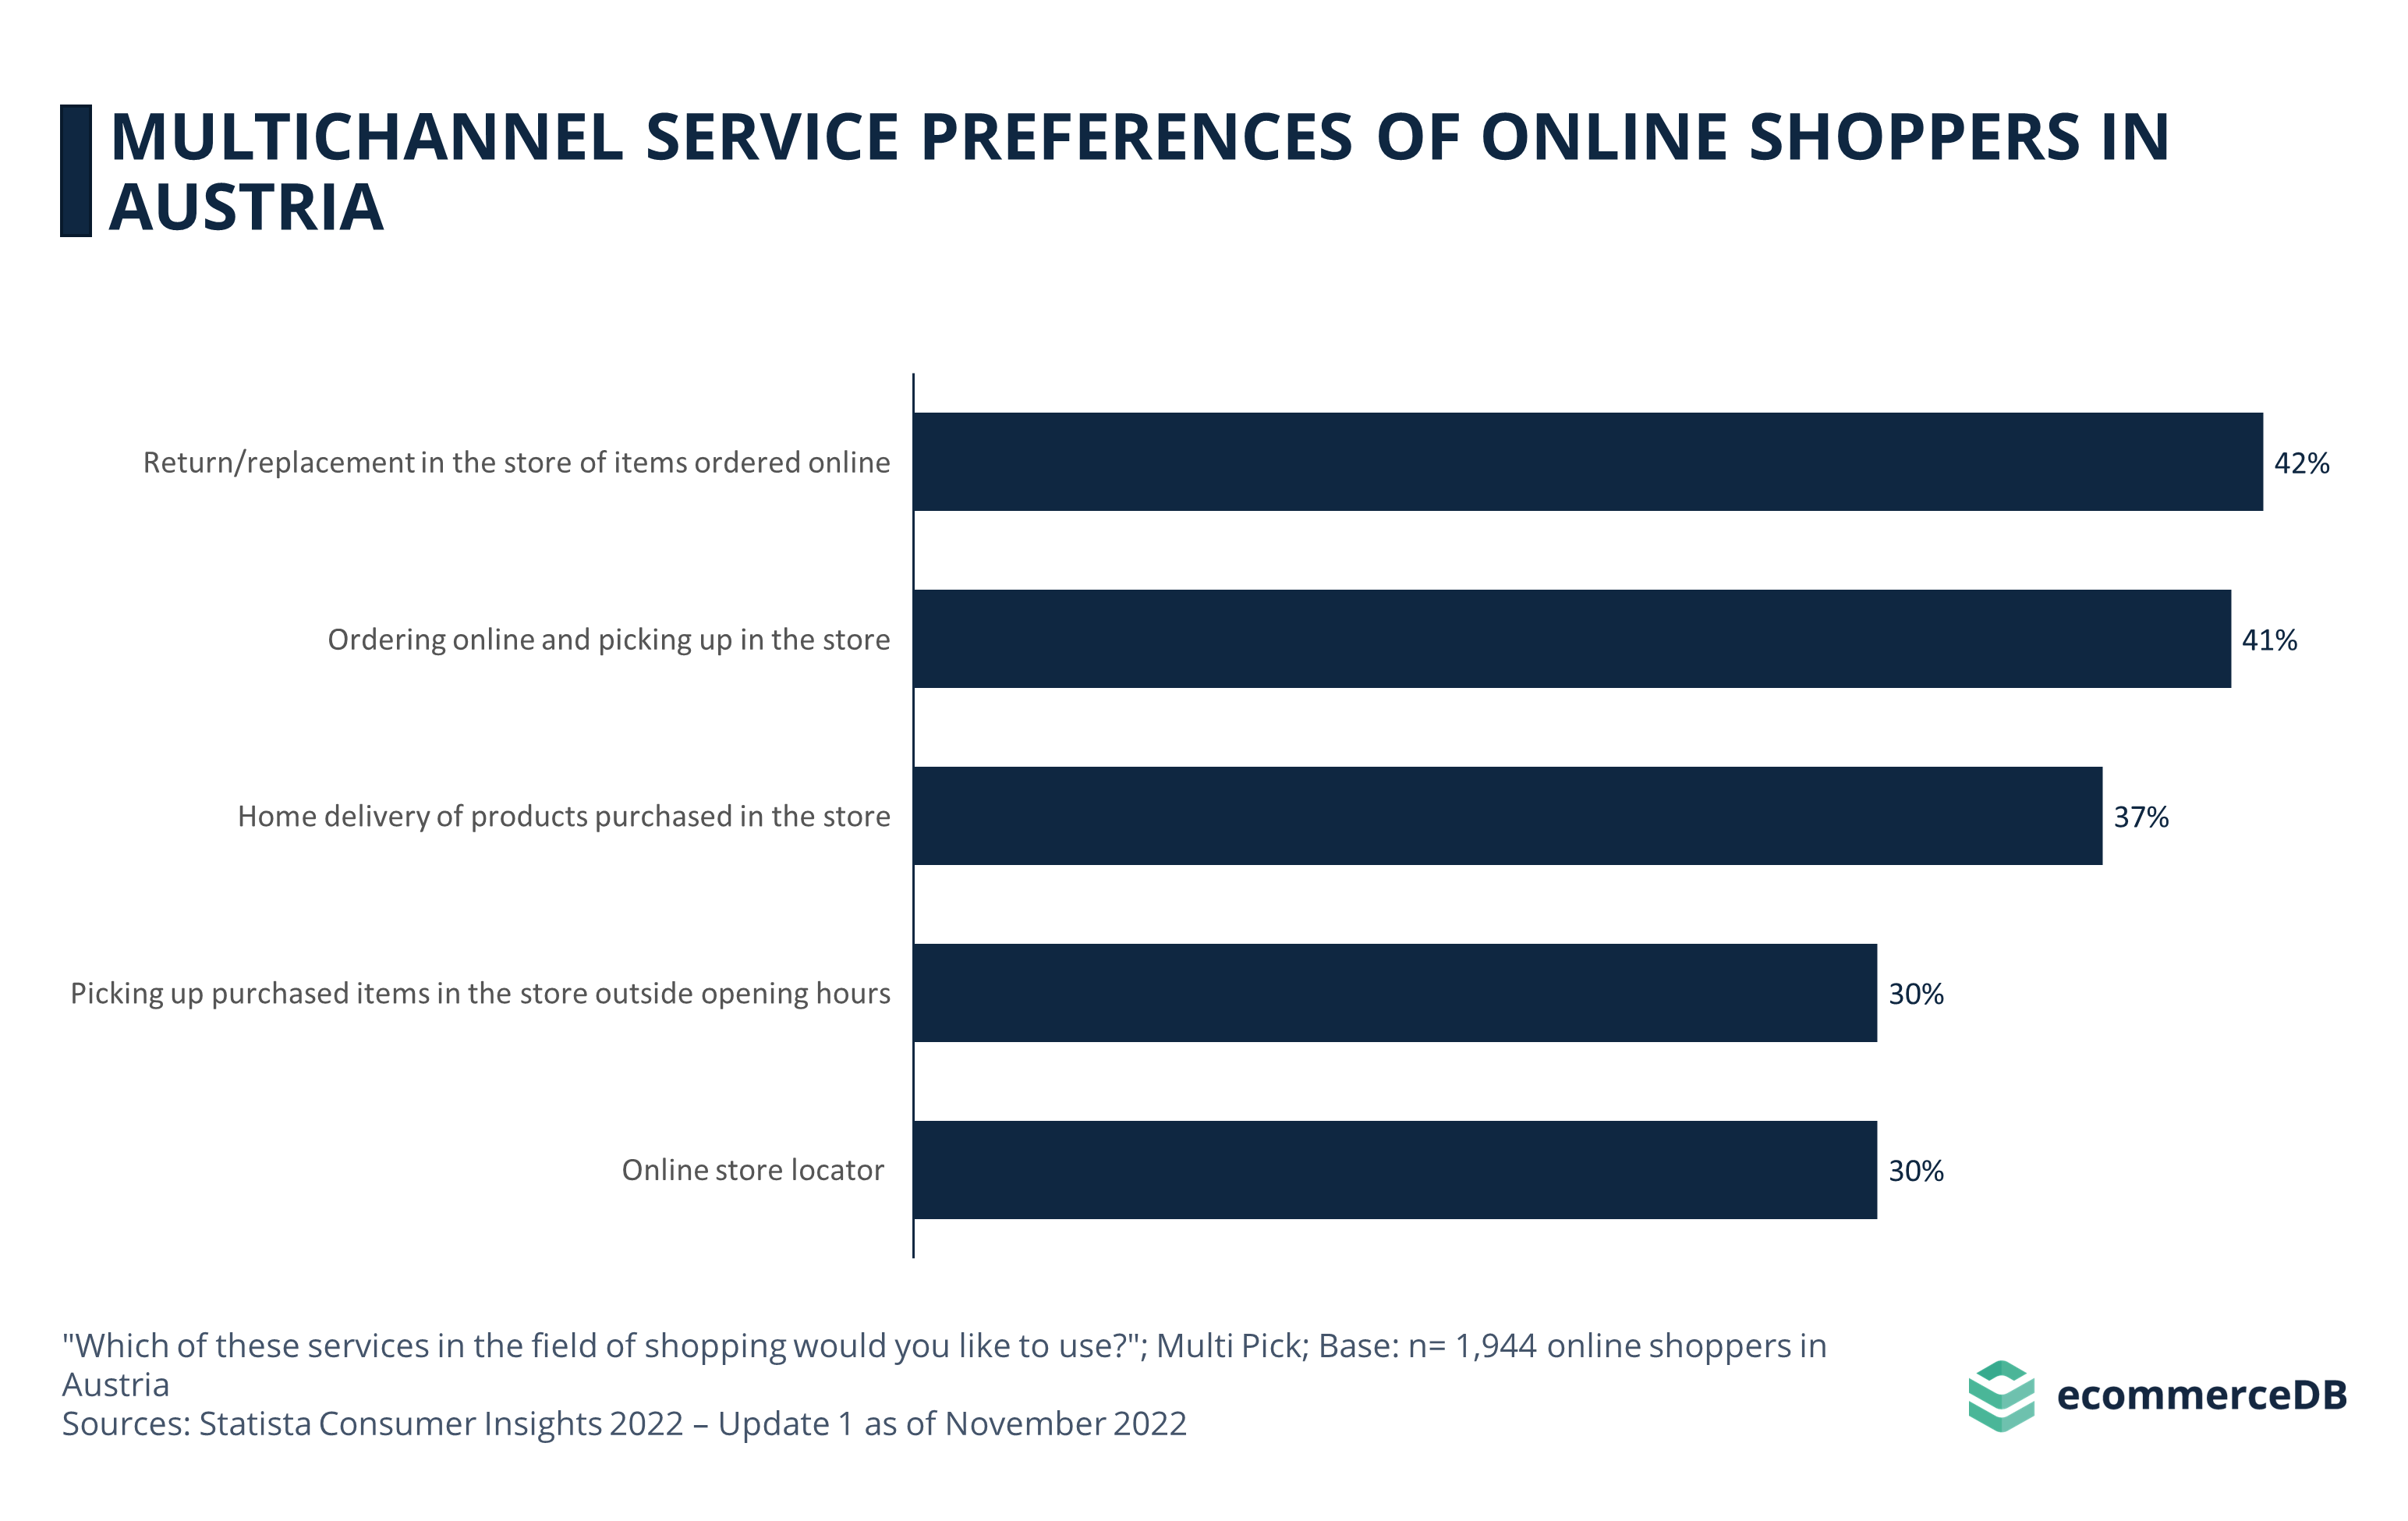 Multichannel Service Preferences of Online Shoppers in Austria 